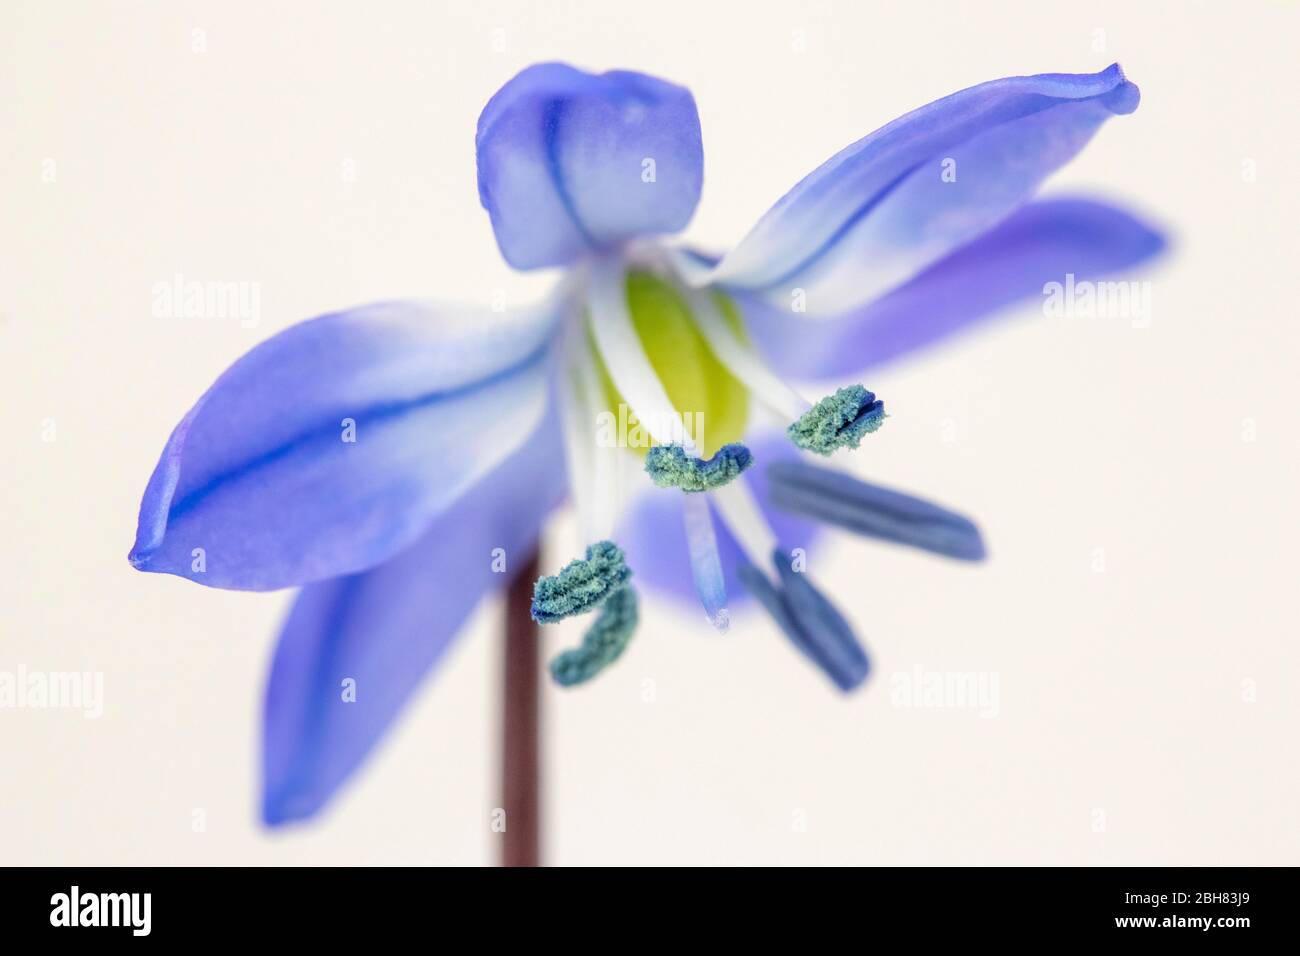 Closeup image of a Scilla forbesii flower against a white background Stock Photo